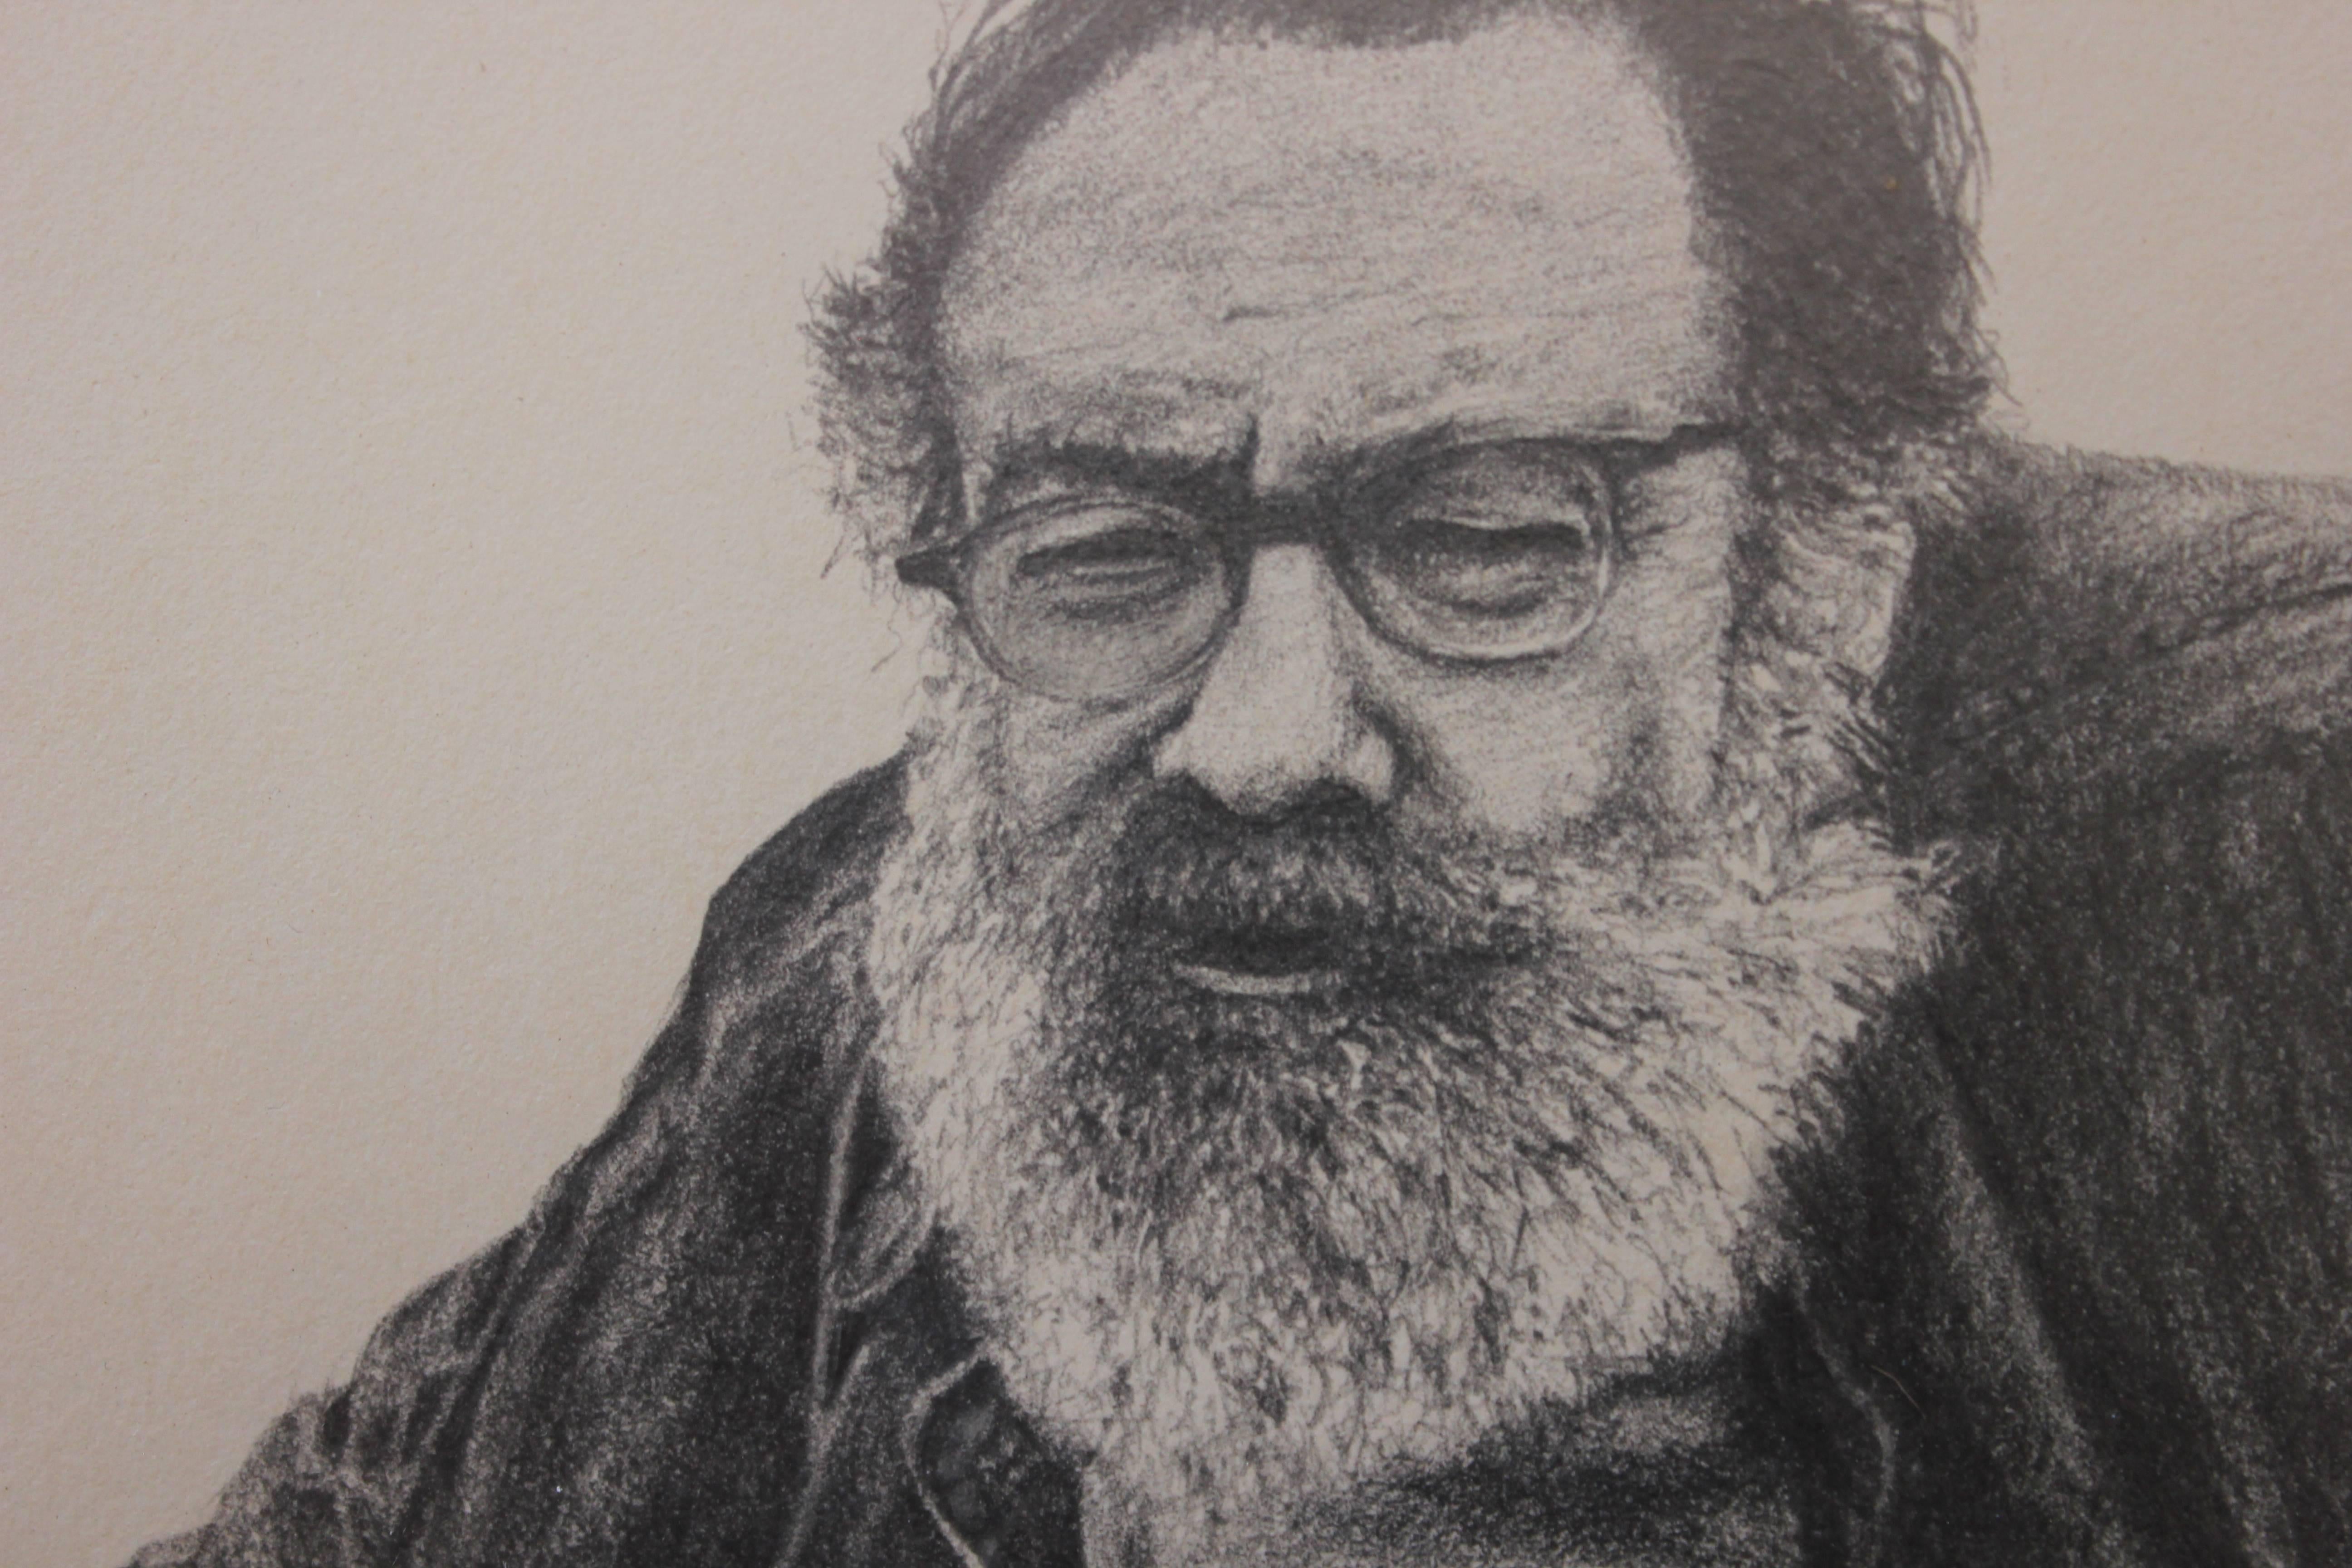 Gorgeous and detailed portrait sketch of a bearded man in a leather jacket and glasses by artist Hallam in 1974.